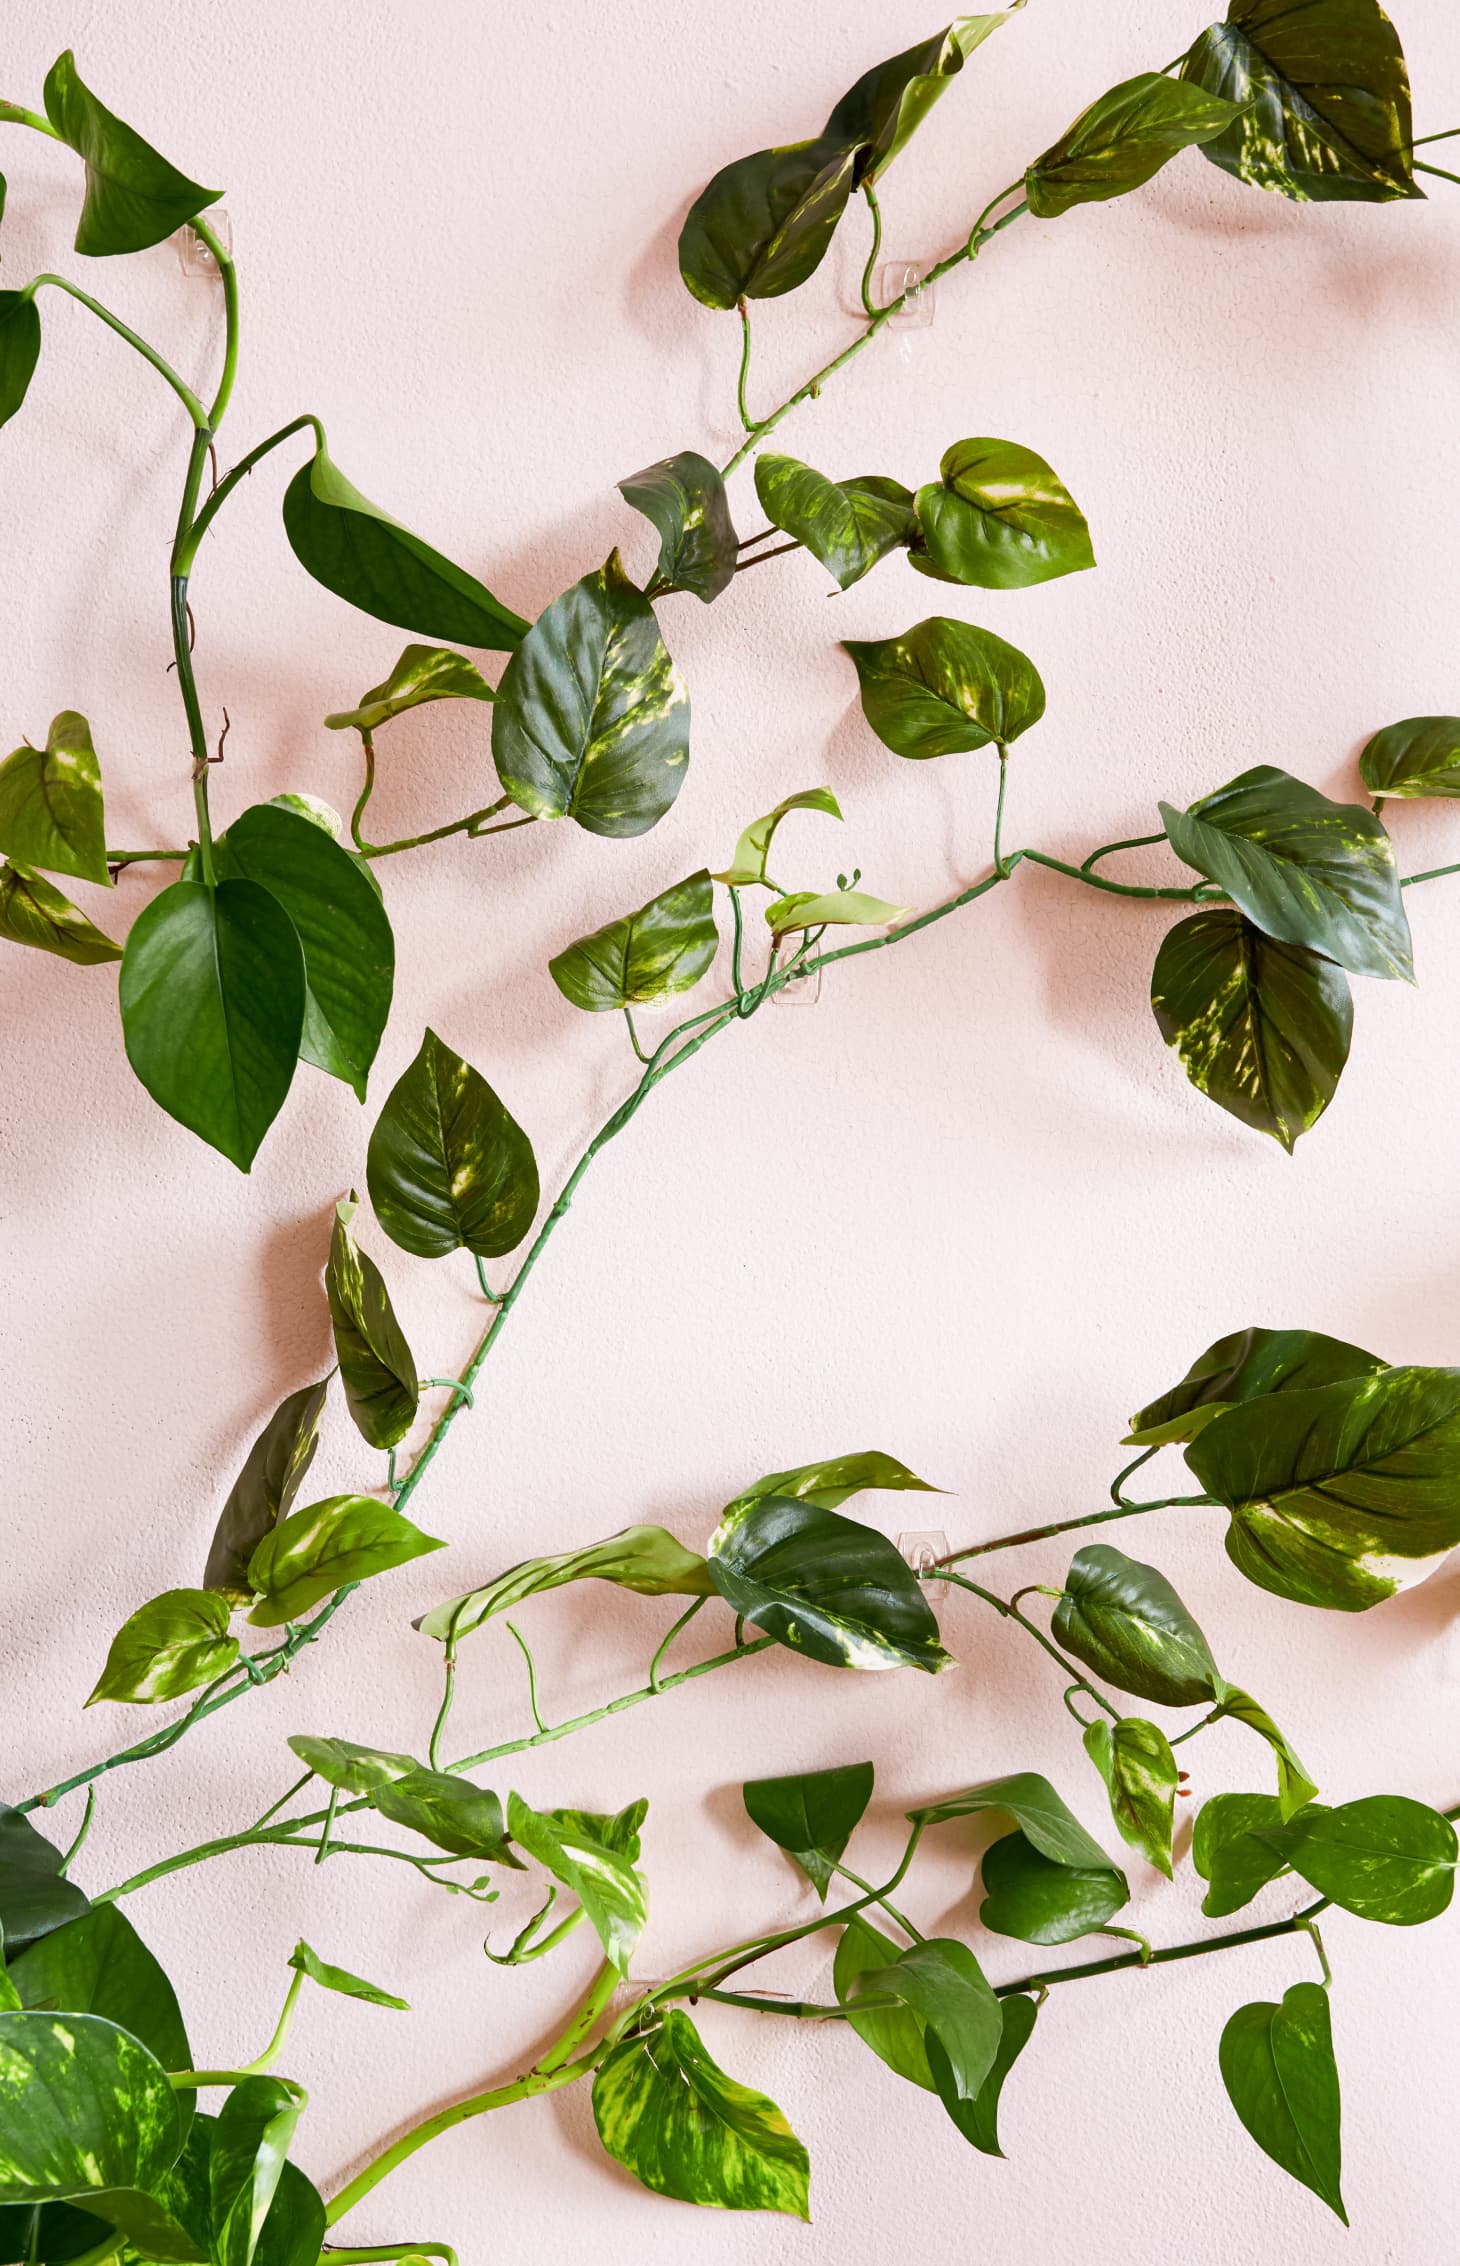 Pothos Plants Care, Propagating, Cuttings, Cats Apartment Therapy